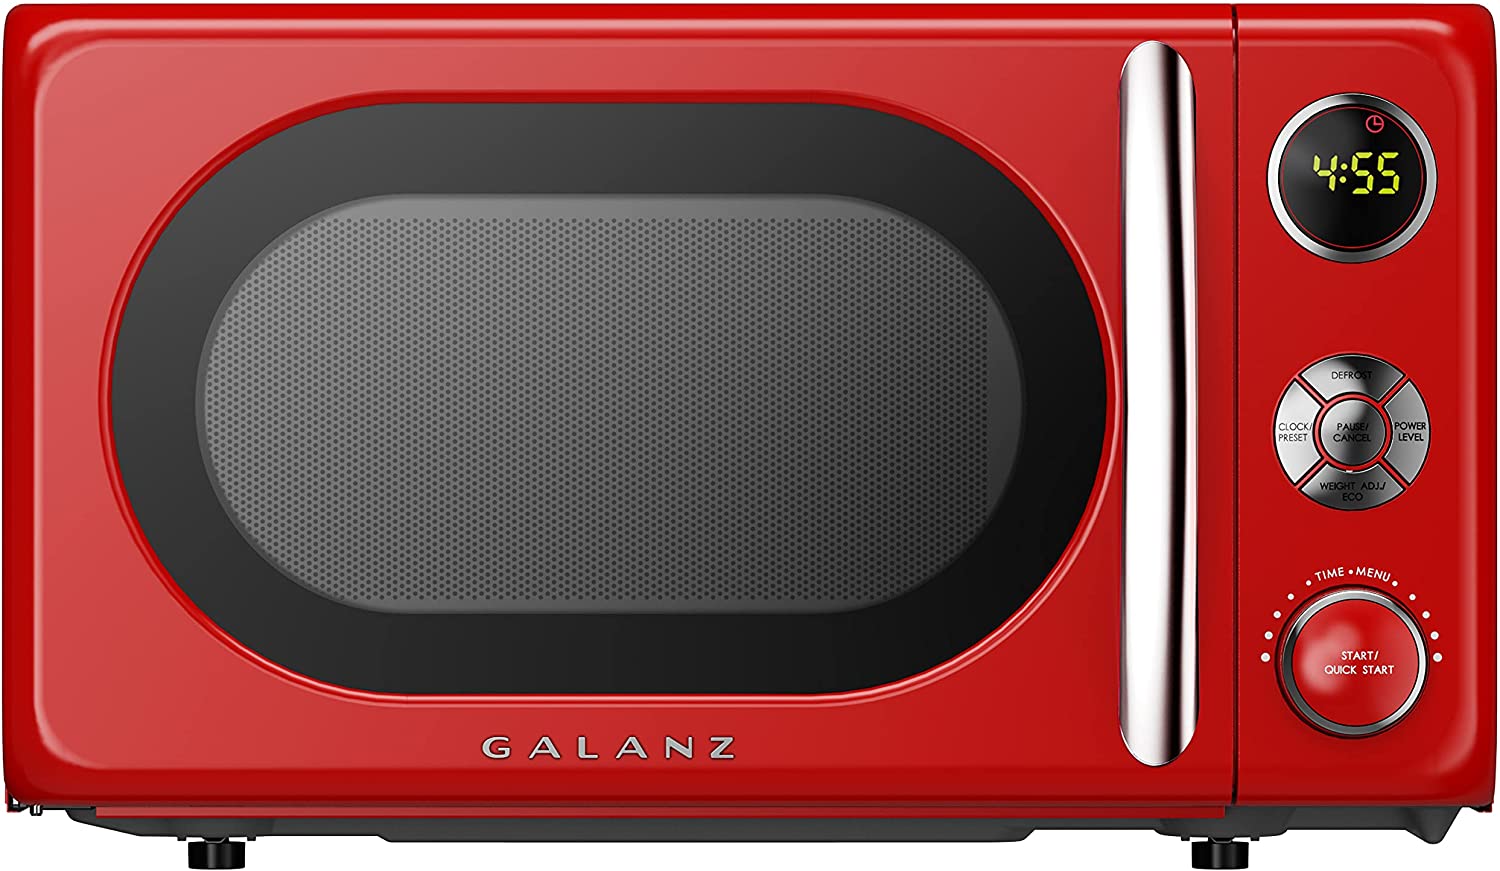 galanz retro microwave oven review